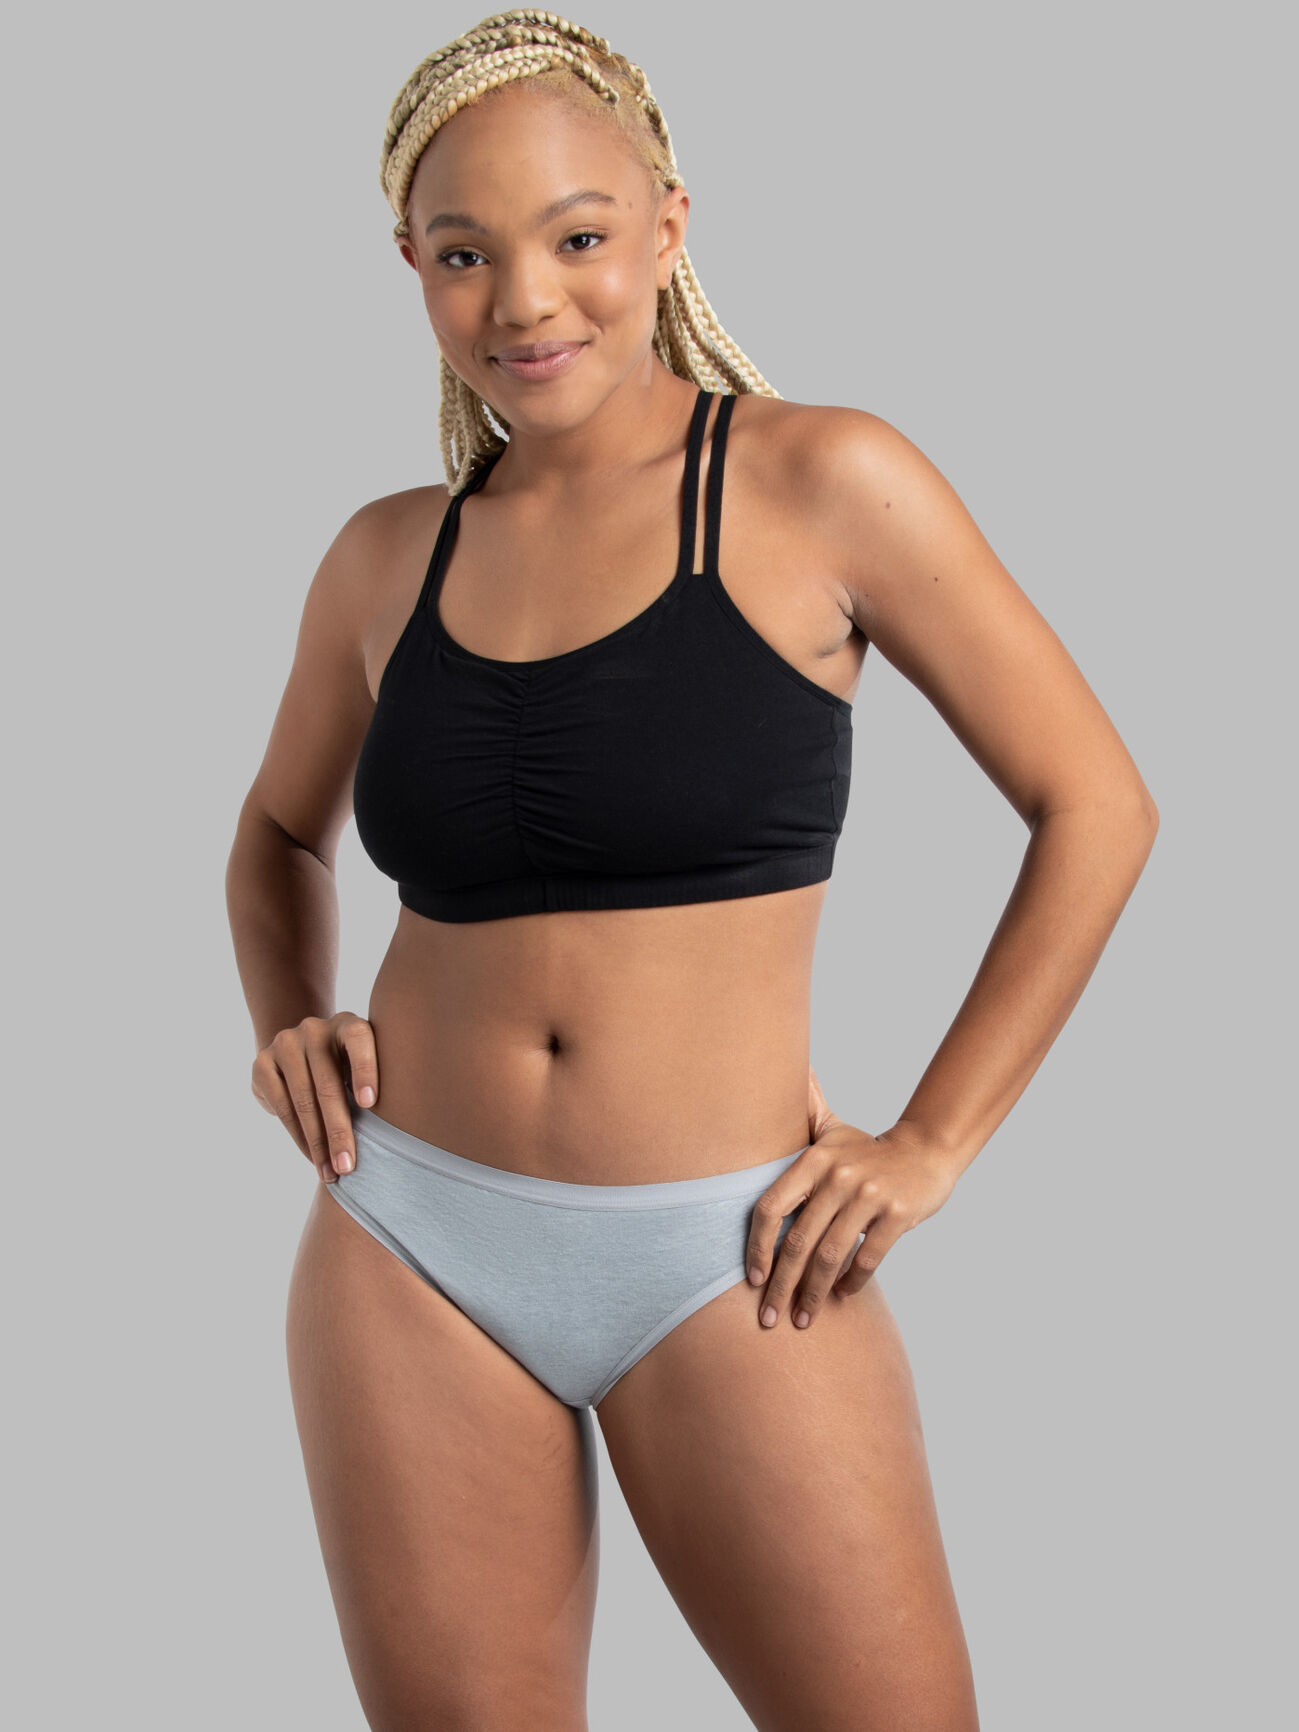 Fruit of the Loom Women's Beyondsoft Underwear, Super Soft Designed with  Comfort in Mind, Available in Plus Size